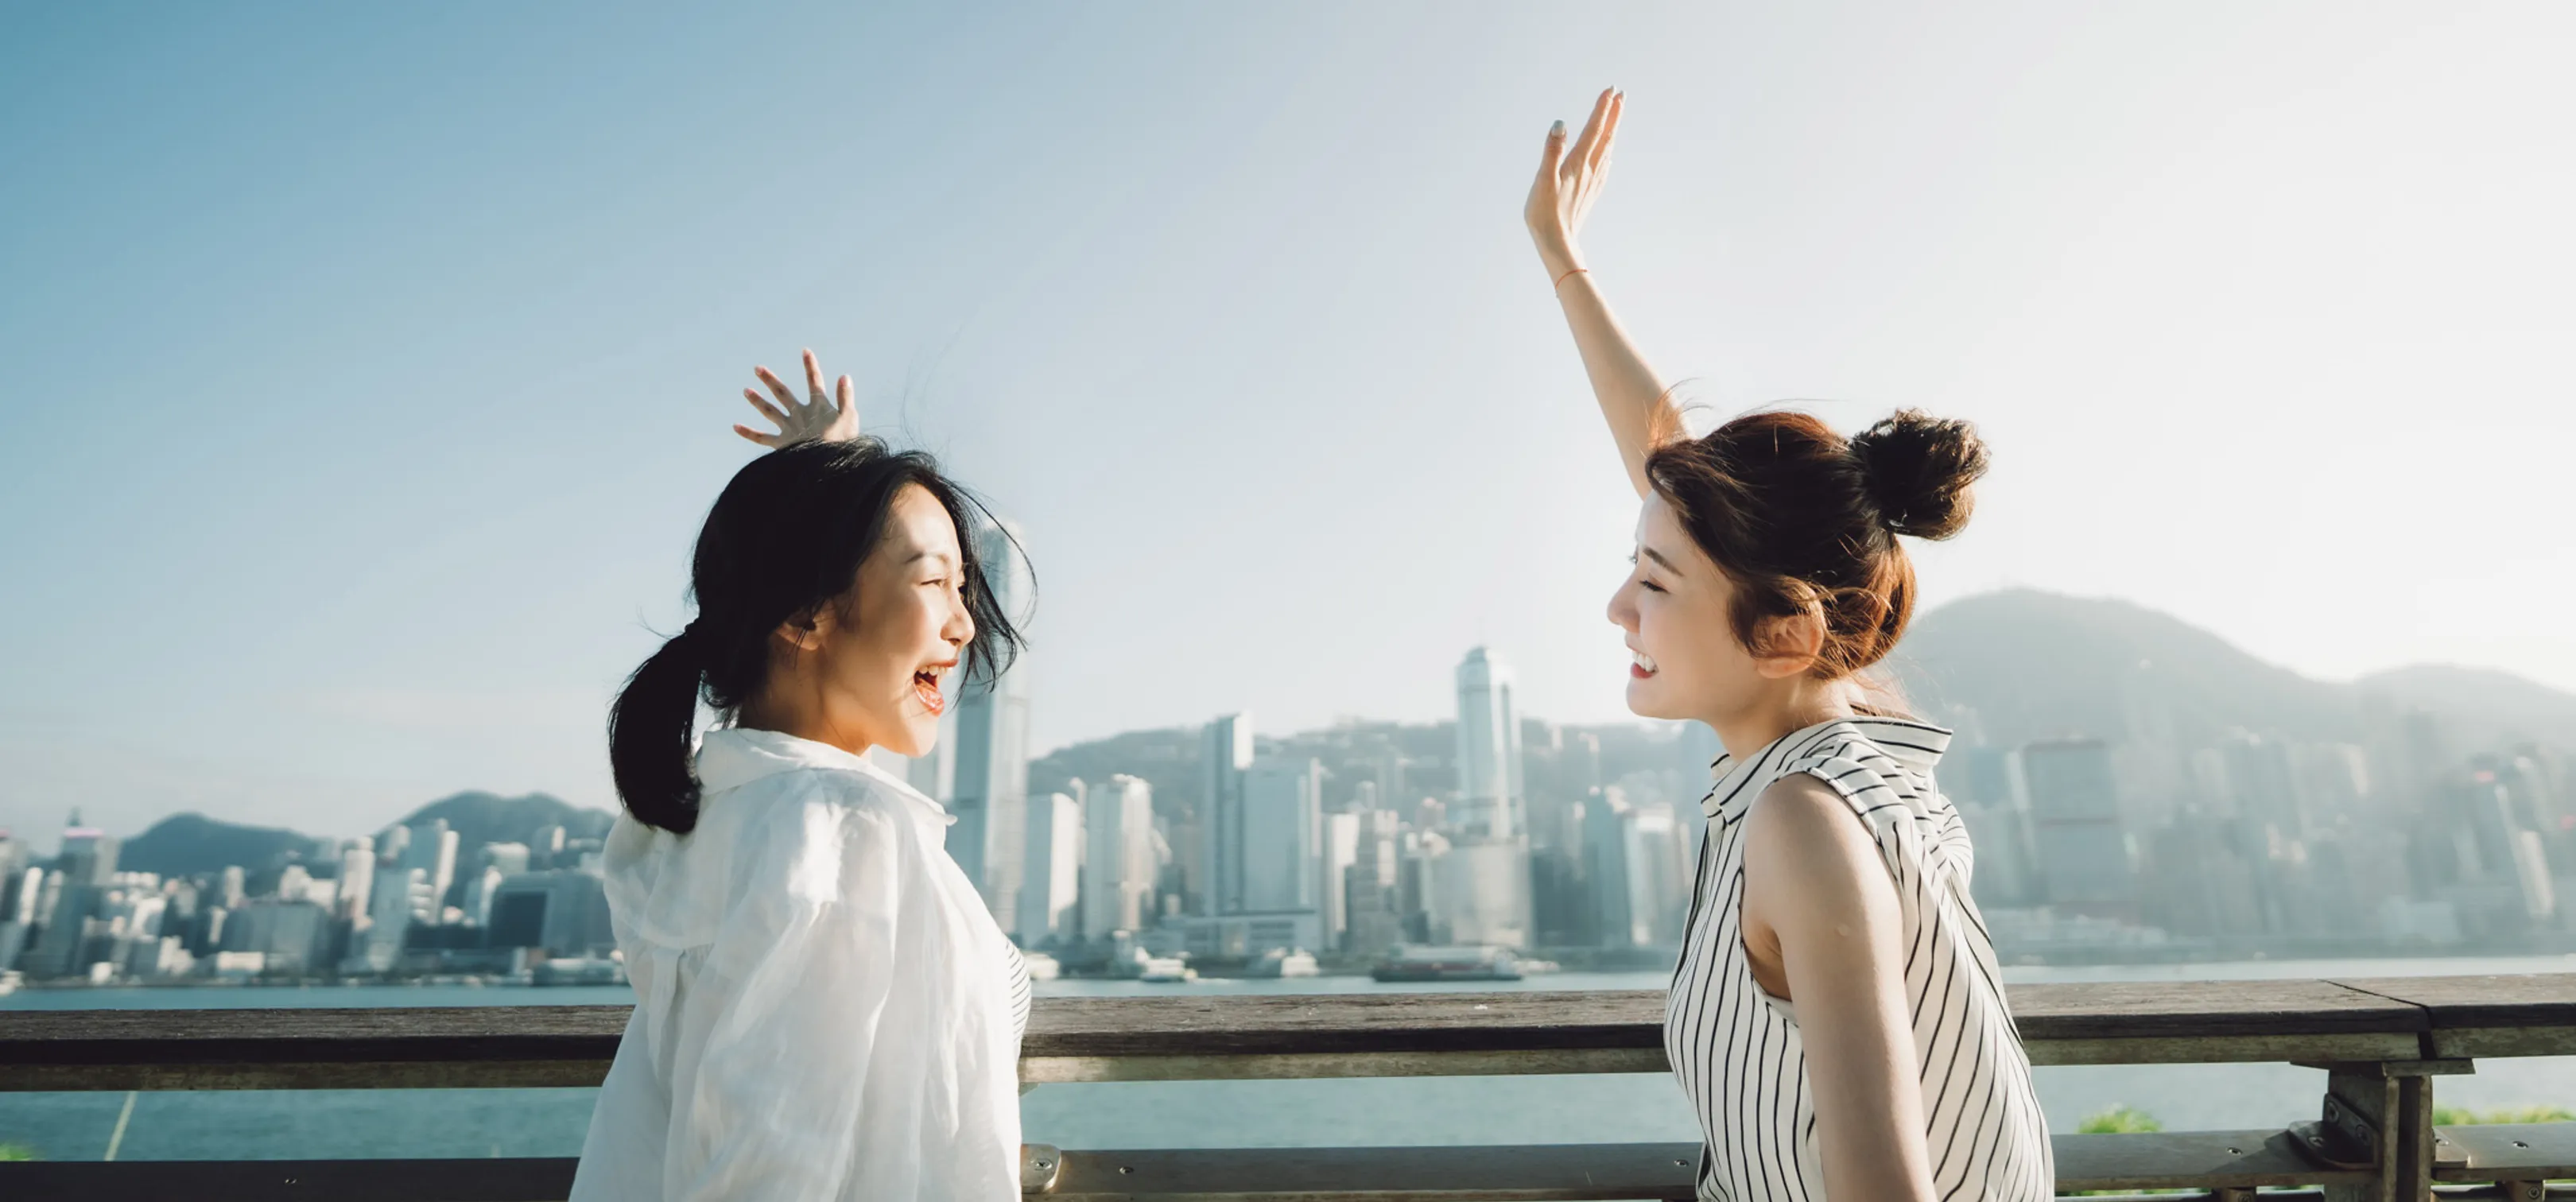 Capture your memories with a photoshoot in Hong Kong